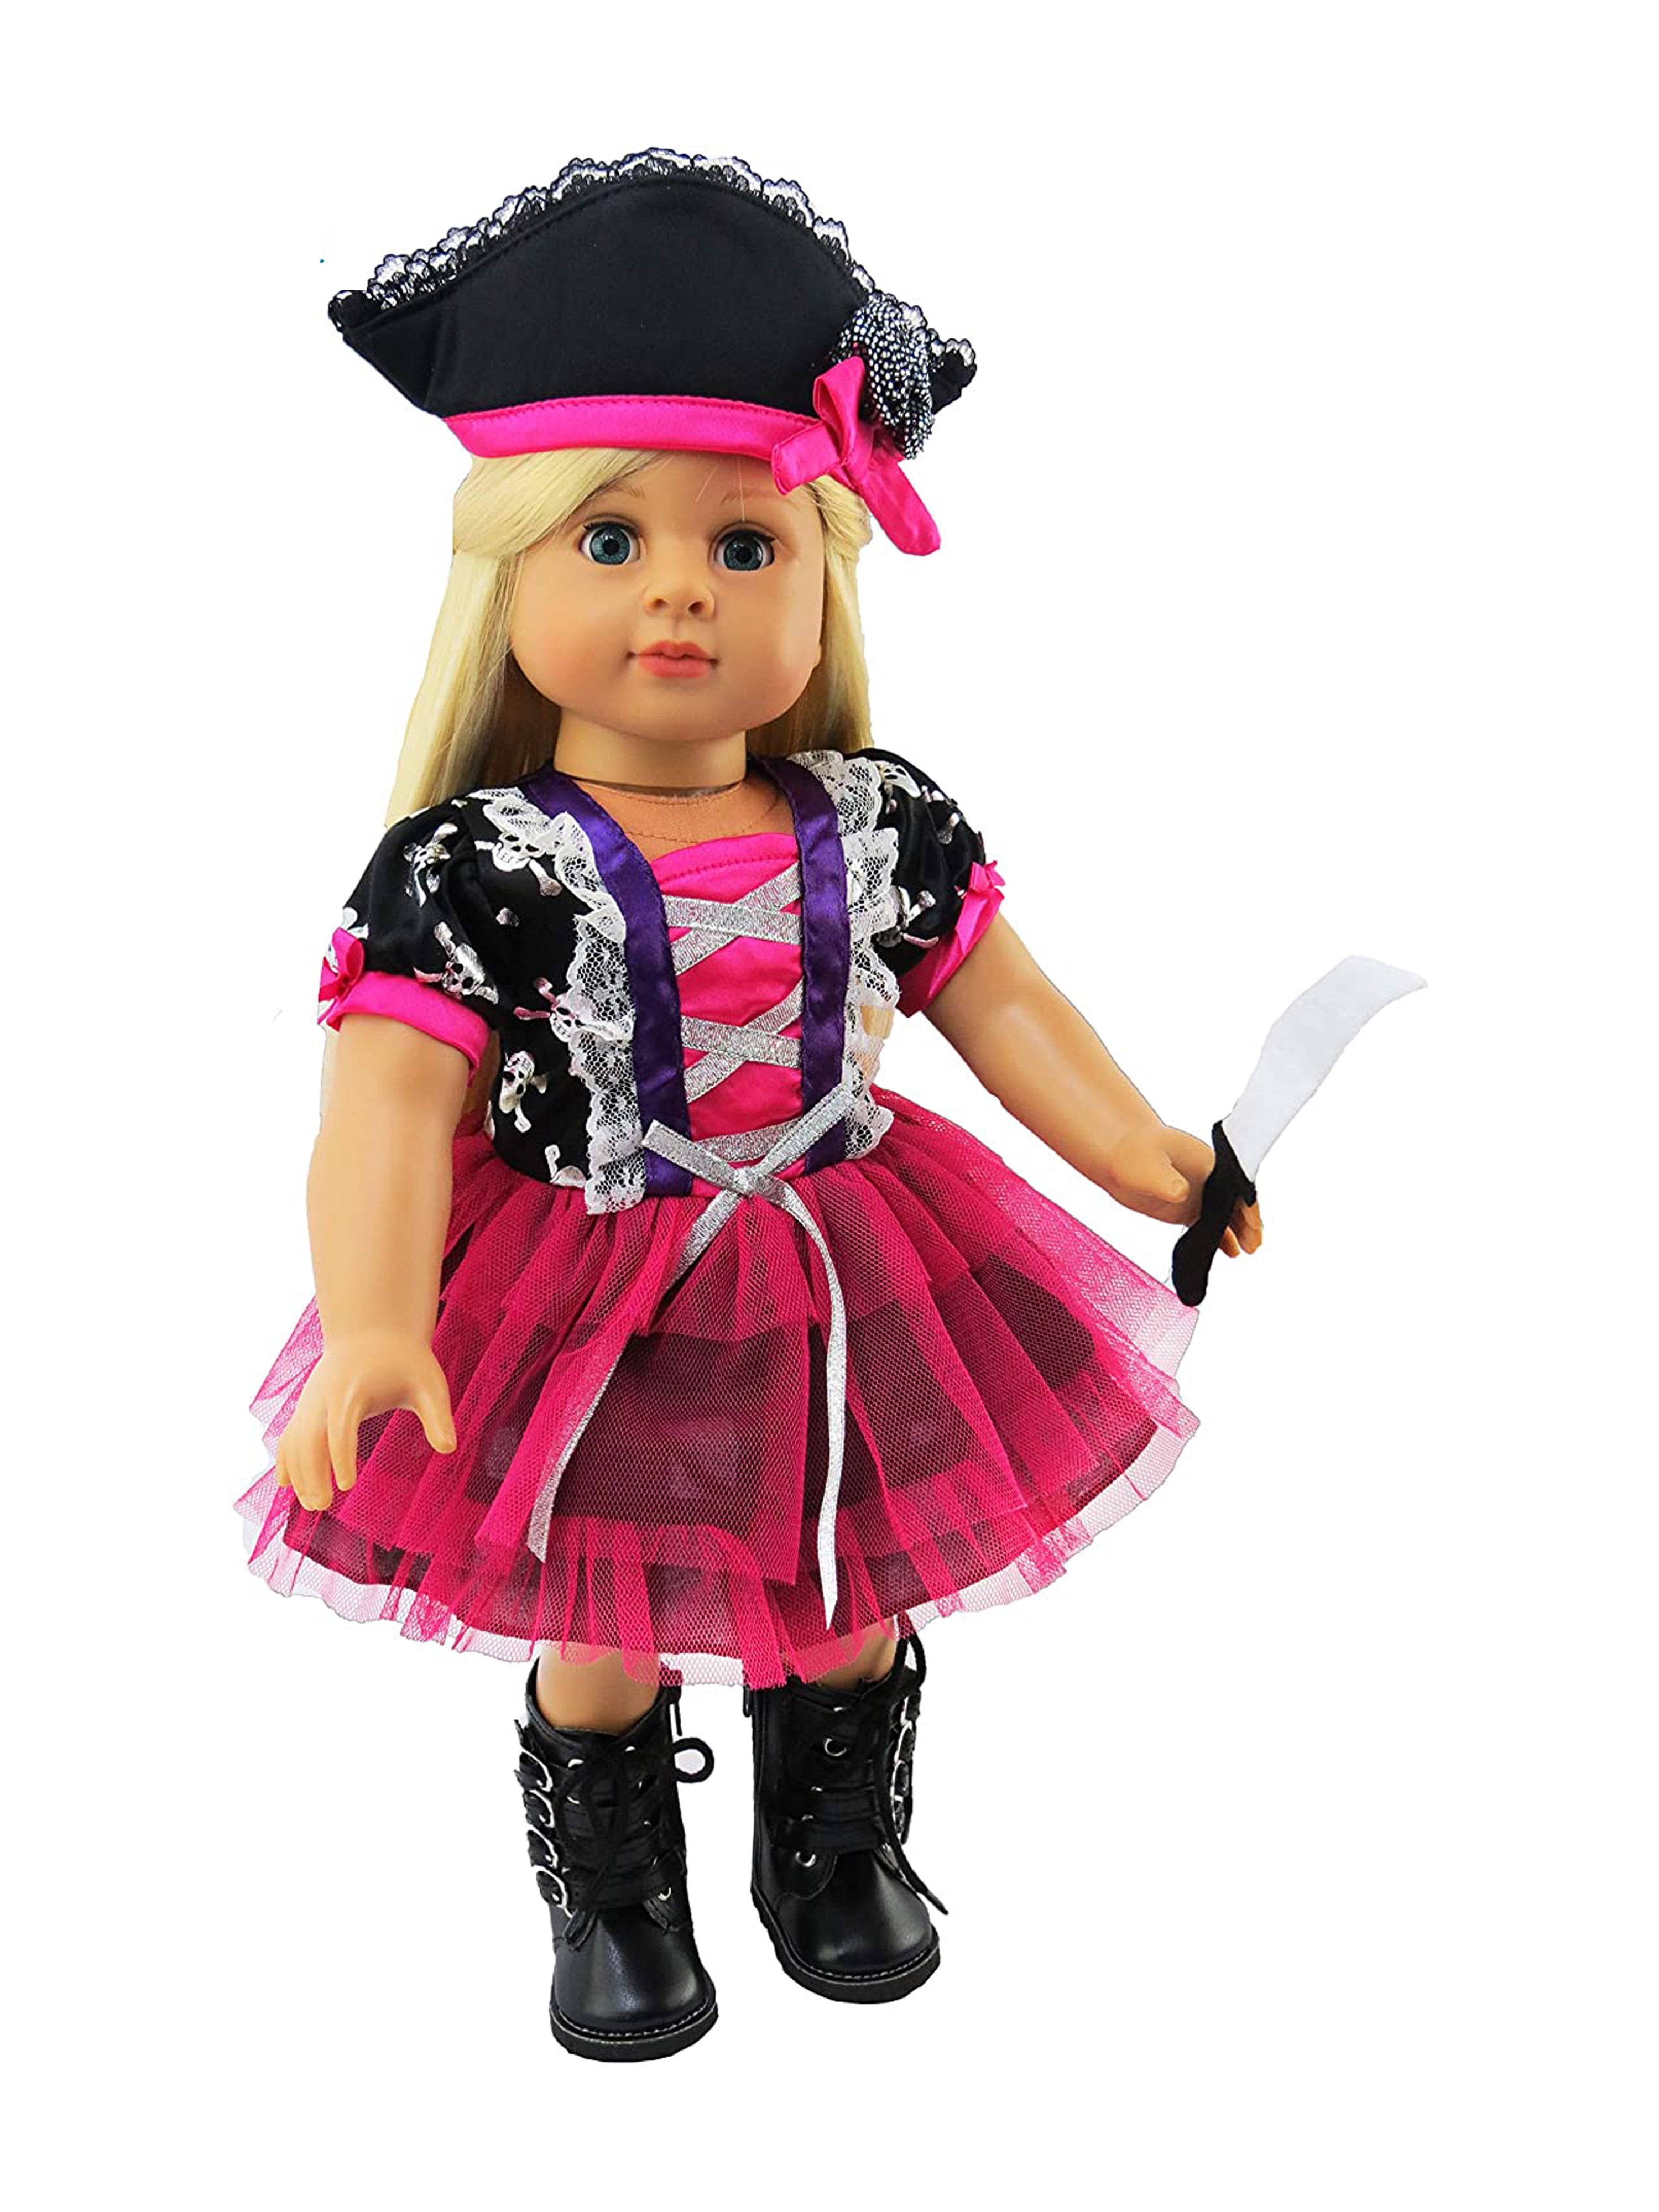 Dress Hat Clothes 18'' American Doll Outfits for Halloween Festival Props 